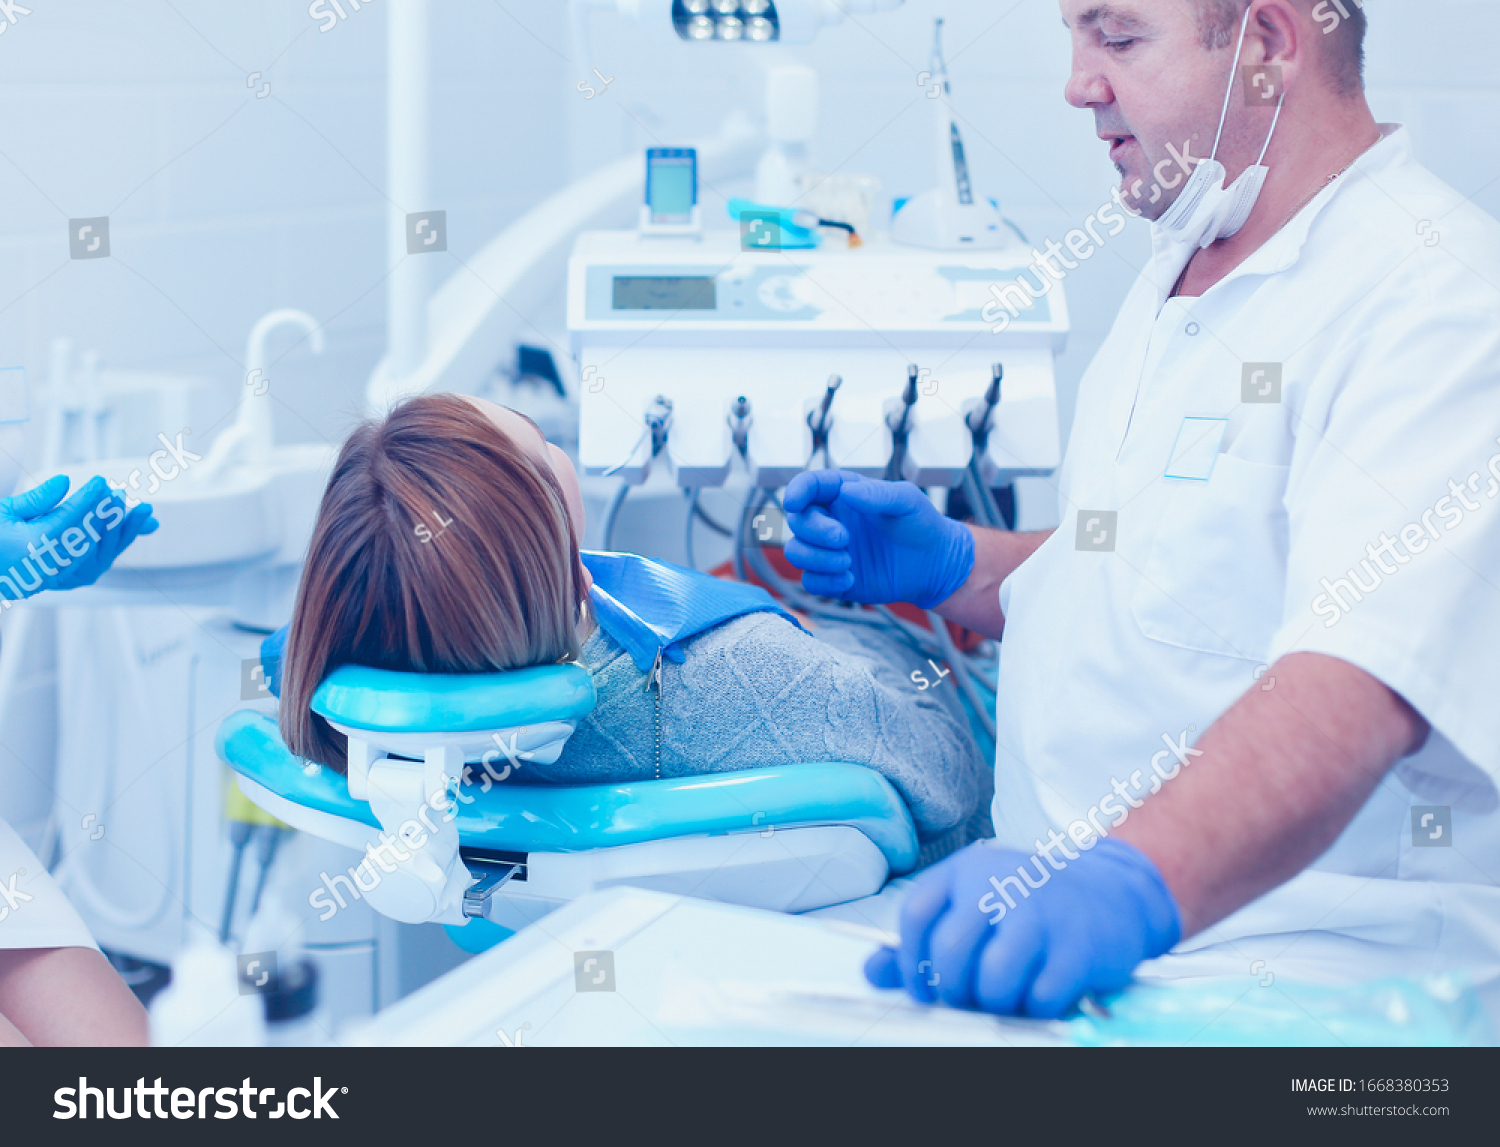 Senior male dentist in dental office talking with female patient and preparing for treatment #1668380353